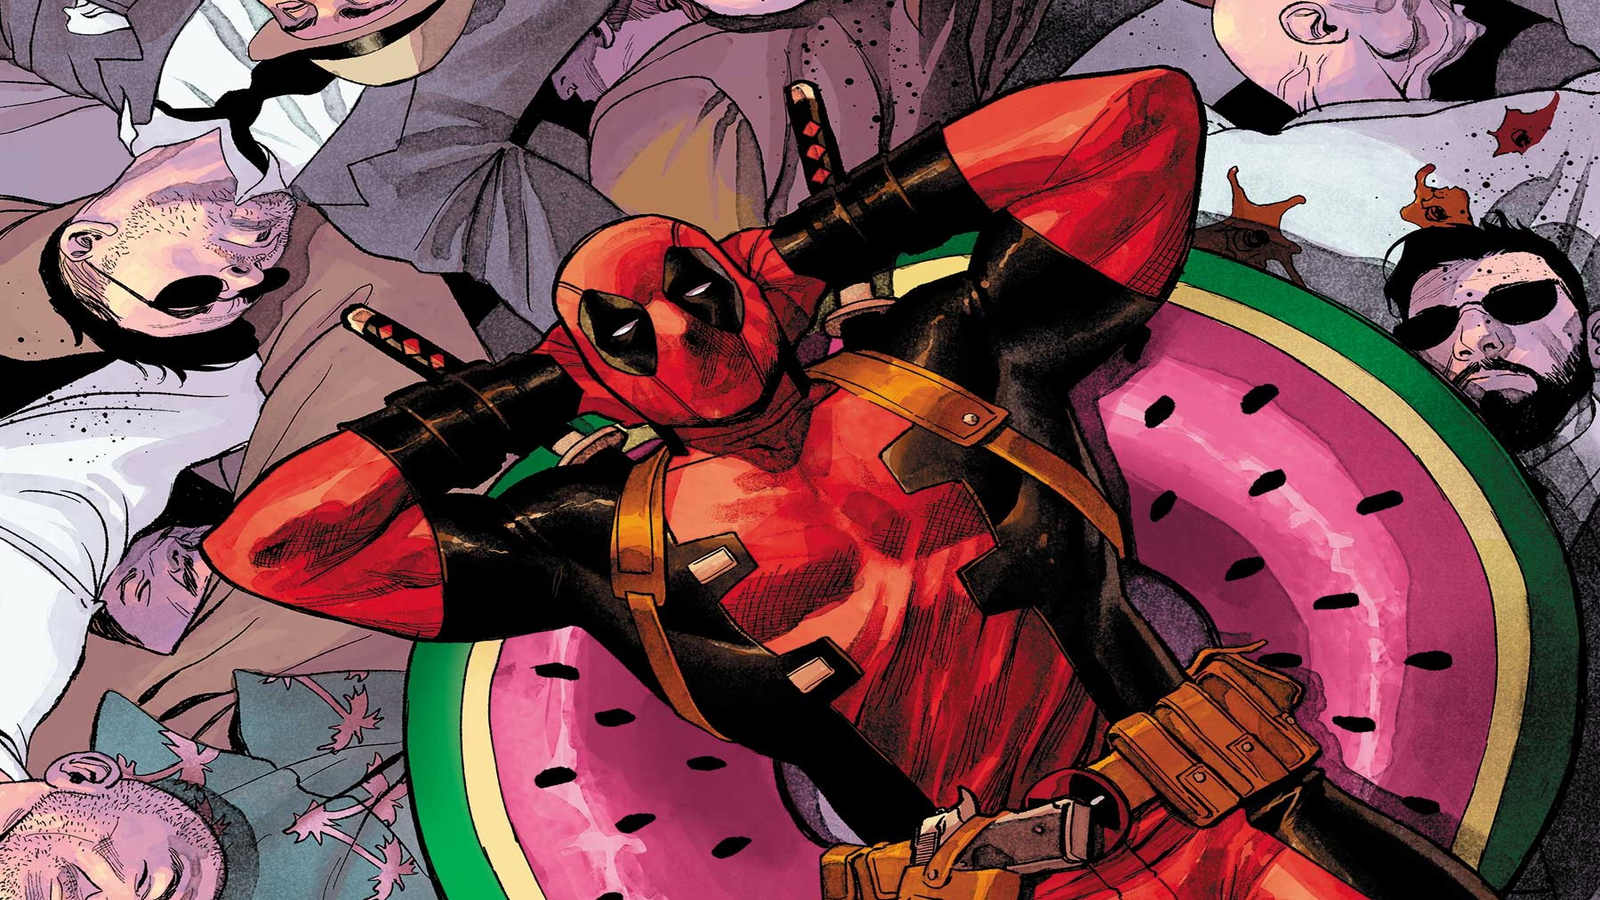 Deadpool: 4 Facts Only Real Marvel Fans Know About 'The Merc With